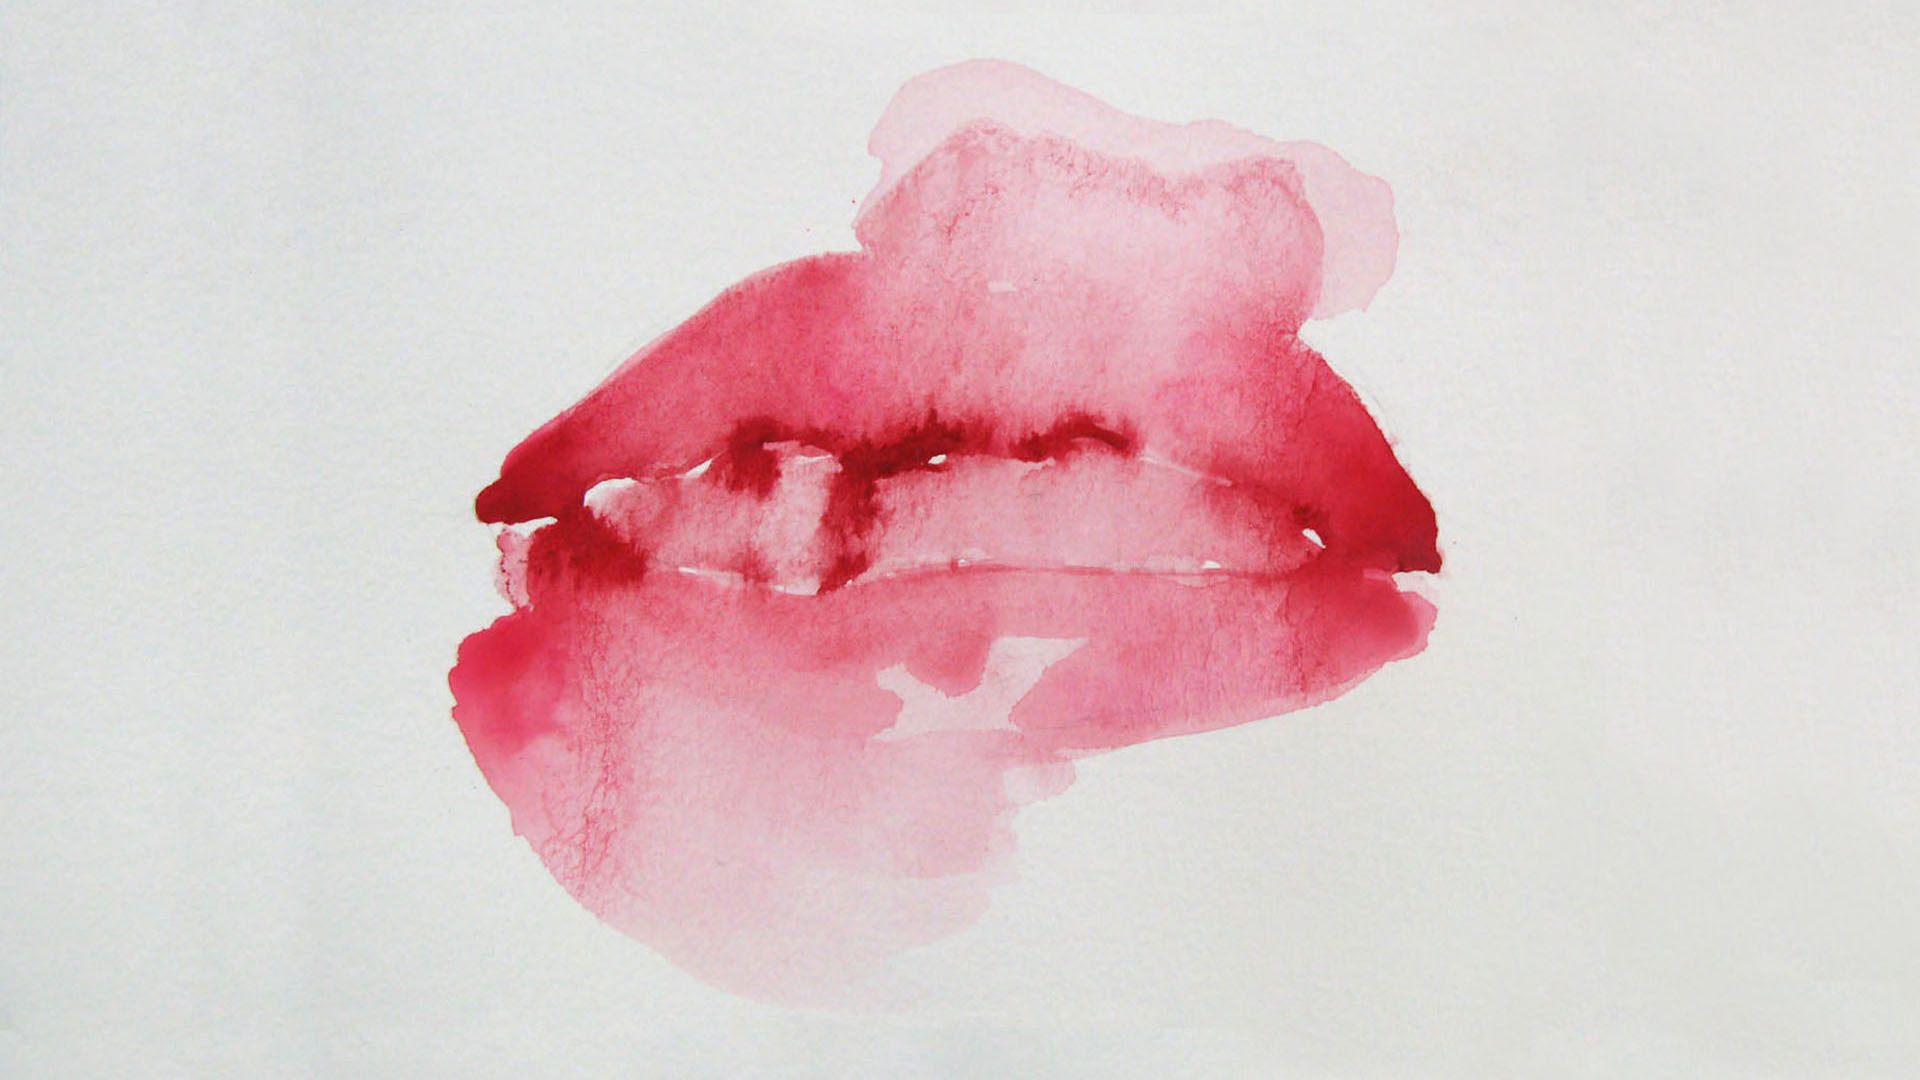 Image from Mouth series by artist Emilia Izquierdo. Watercolour on paper.